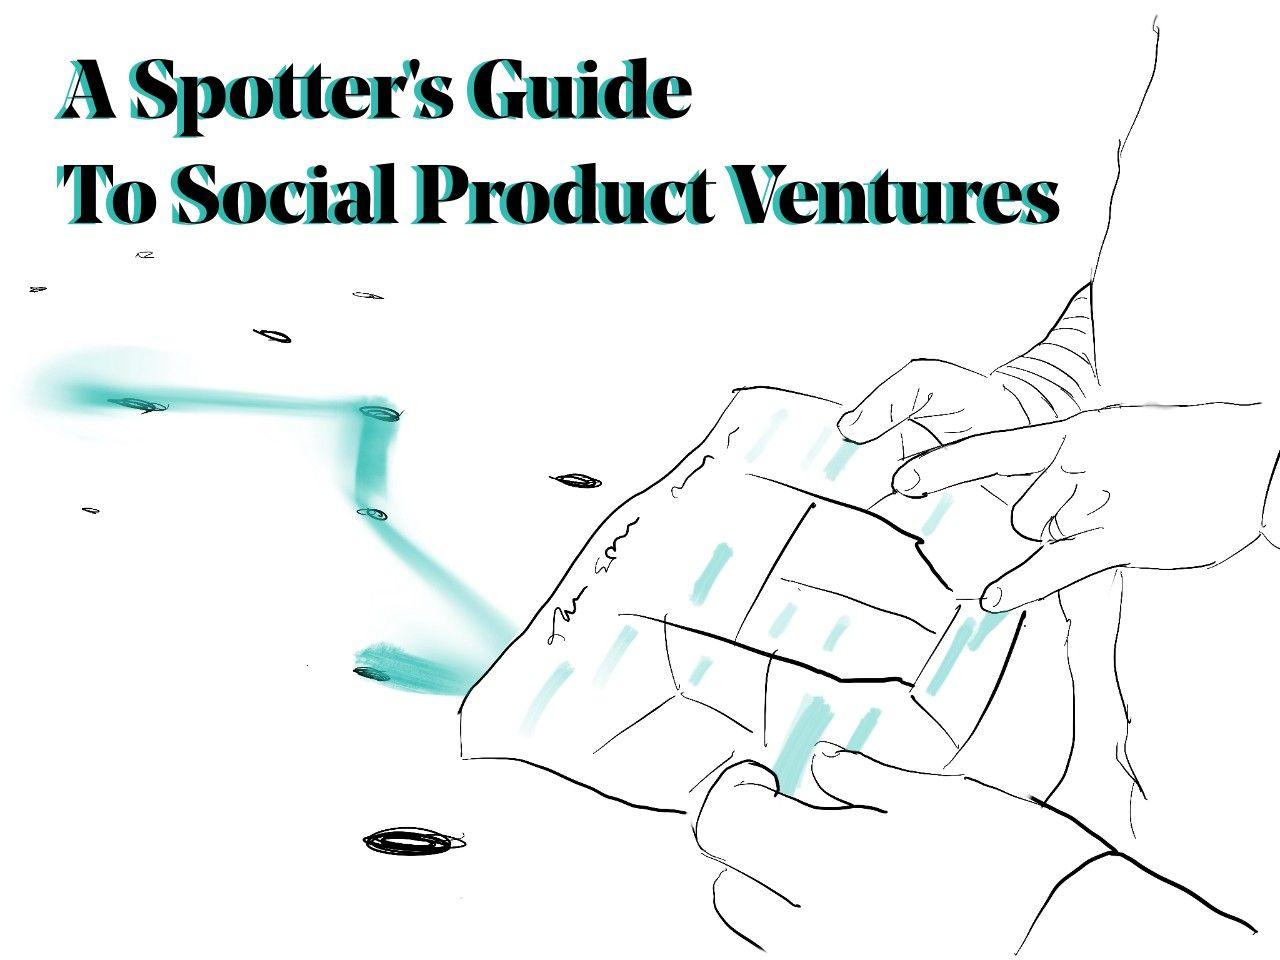 Cover Image for A Spotter’s Guide to Social Product Ventures